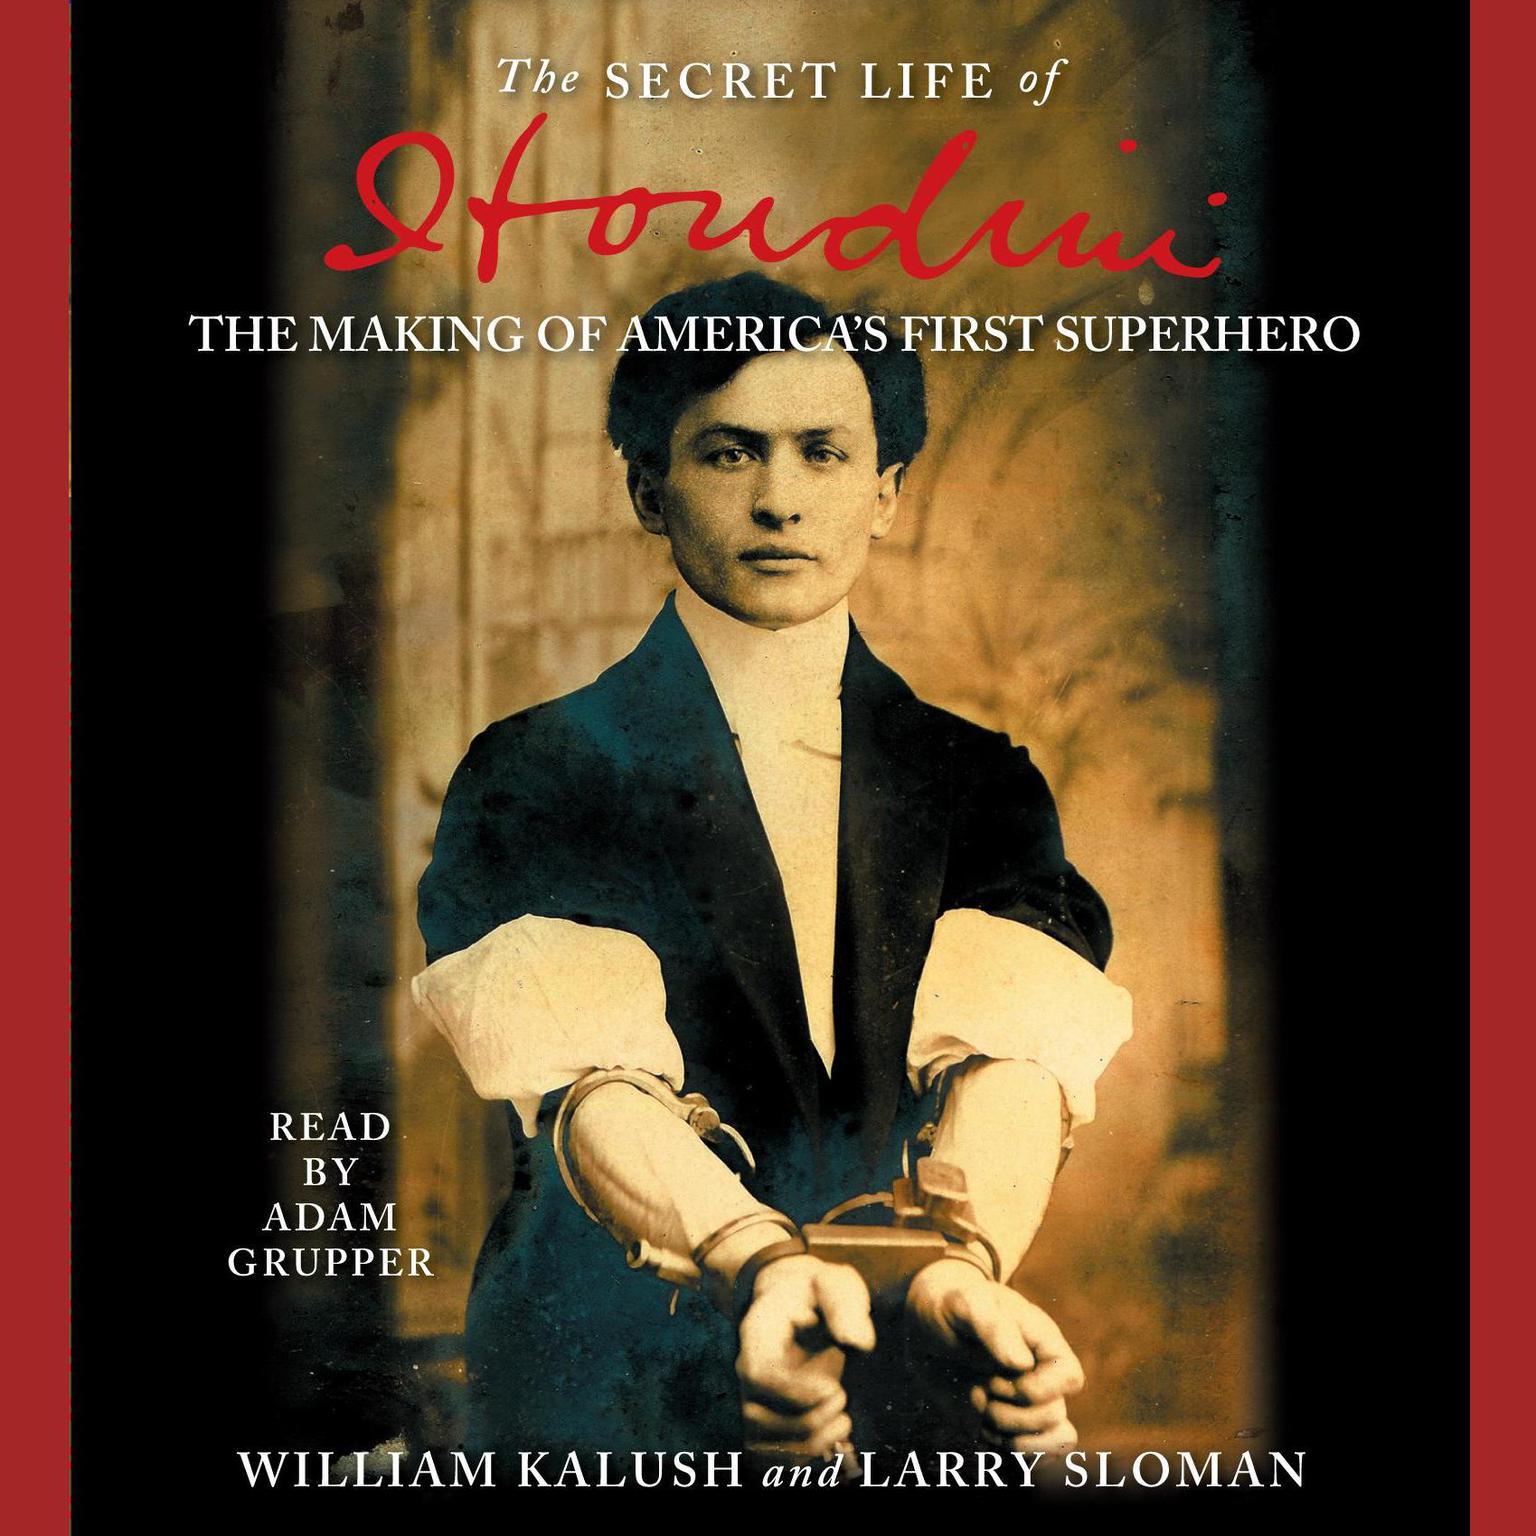 The Secret Life of Houdini (Abridged): The Making of Americas First Superhero Audiobook, by William Kalush